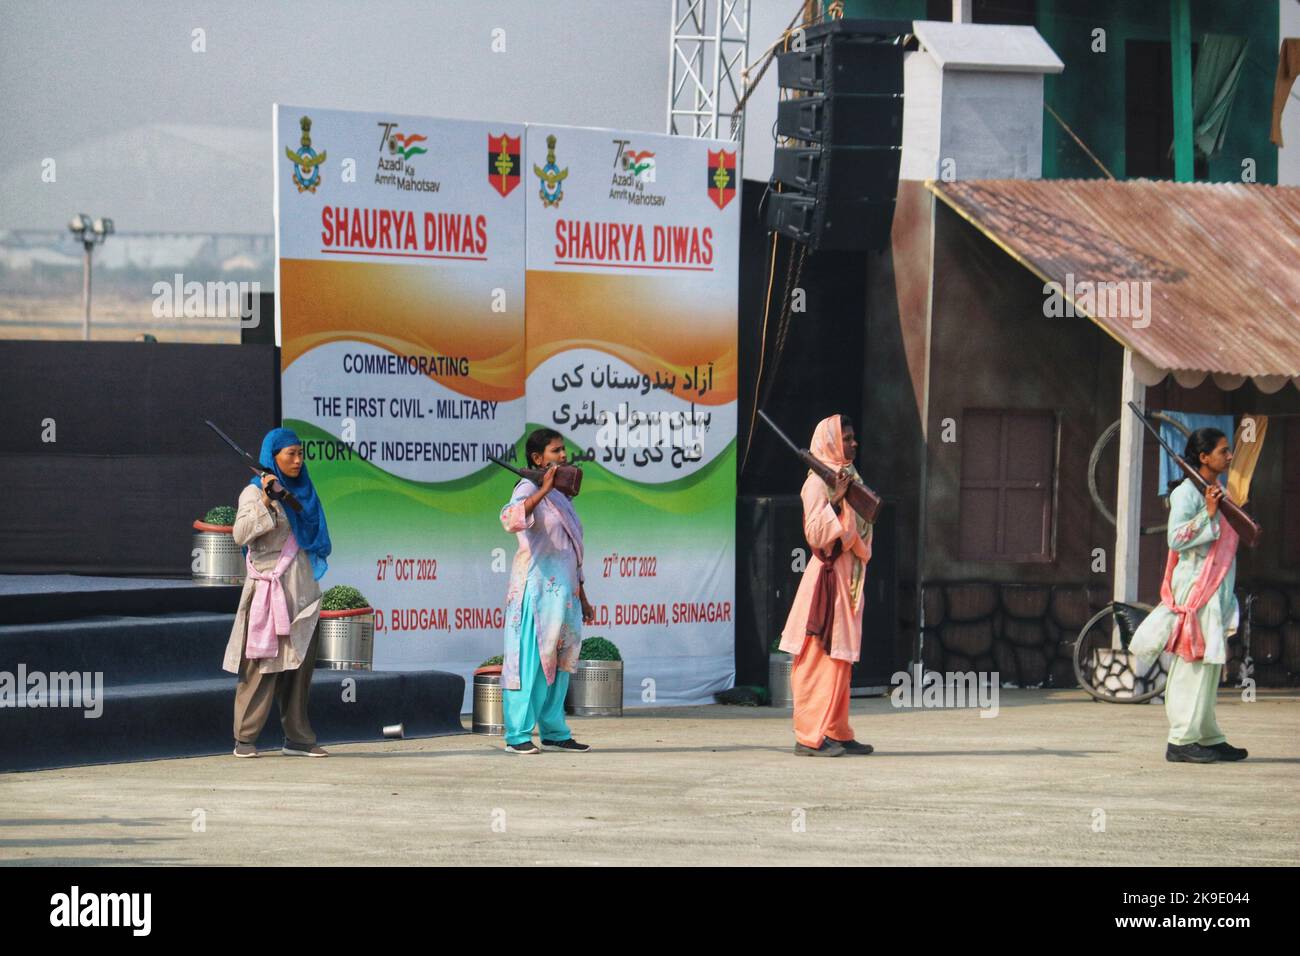 October 27, 2022, Srinagar, Jammu and Kashmir, India: A group of women perform the scenes local women force at a function 76th Infantry Day celebrations in Srinagar, the summer capital of Indian Kashmir, 27 October 2022. Indian Defence Minister Rajnath Singh attended the 'Shaurya Diwas' programme organized by Indian Army in Budgam. The Indian Army was celebrating the day of induction in state of Jammu and Kashmir on 27 October 1947. At the event organized by the Indian Army, it recreated scenes of their re-enactment of landing in Kashmir this day 76 years ago. (Credit Image: © Mubashir Hassan/ Stock Photo